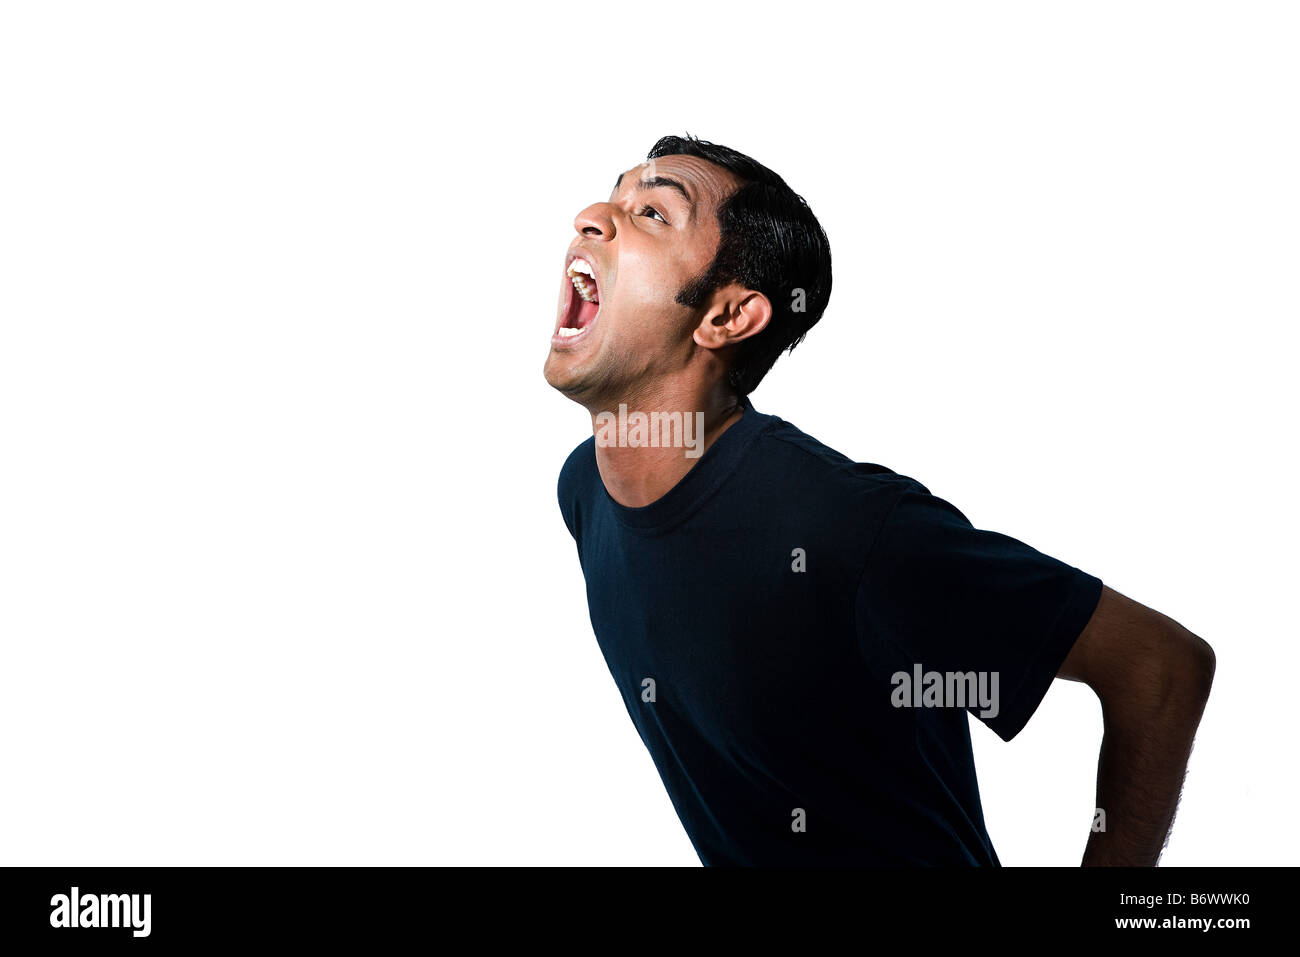 Portrait of a young man shouting Stock Photo